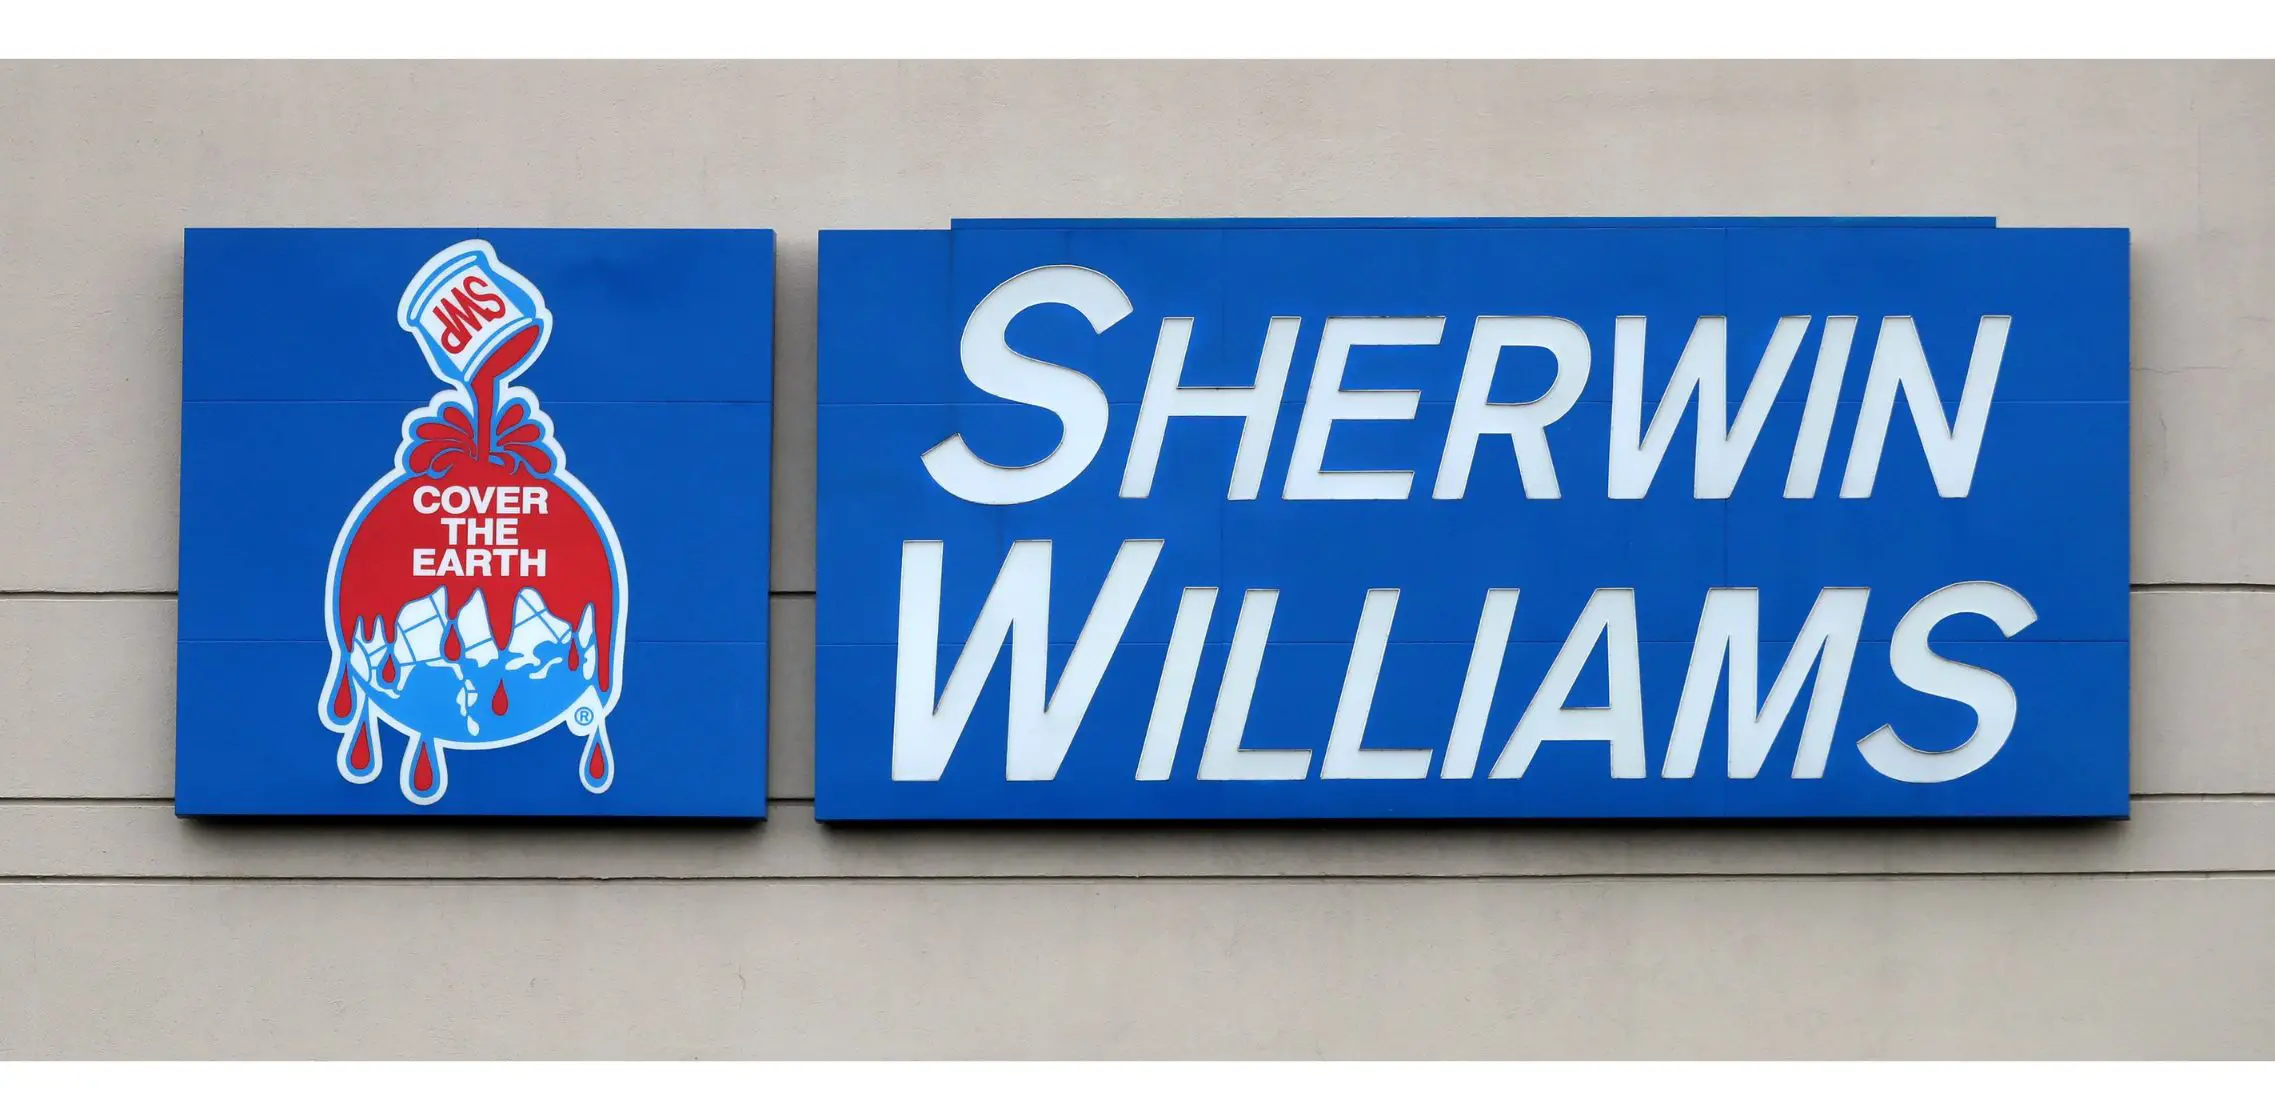 Is Lowes Paint As Good As Sherwin Williams